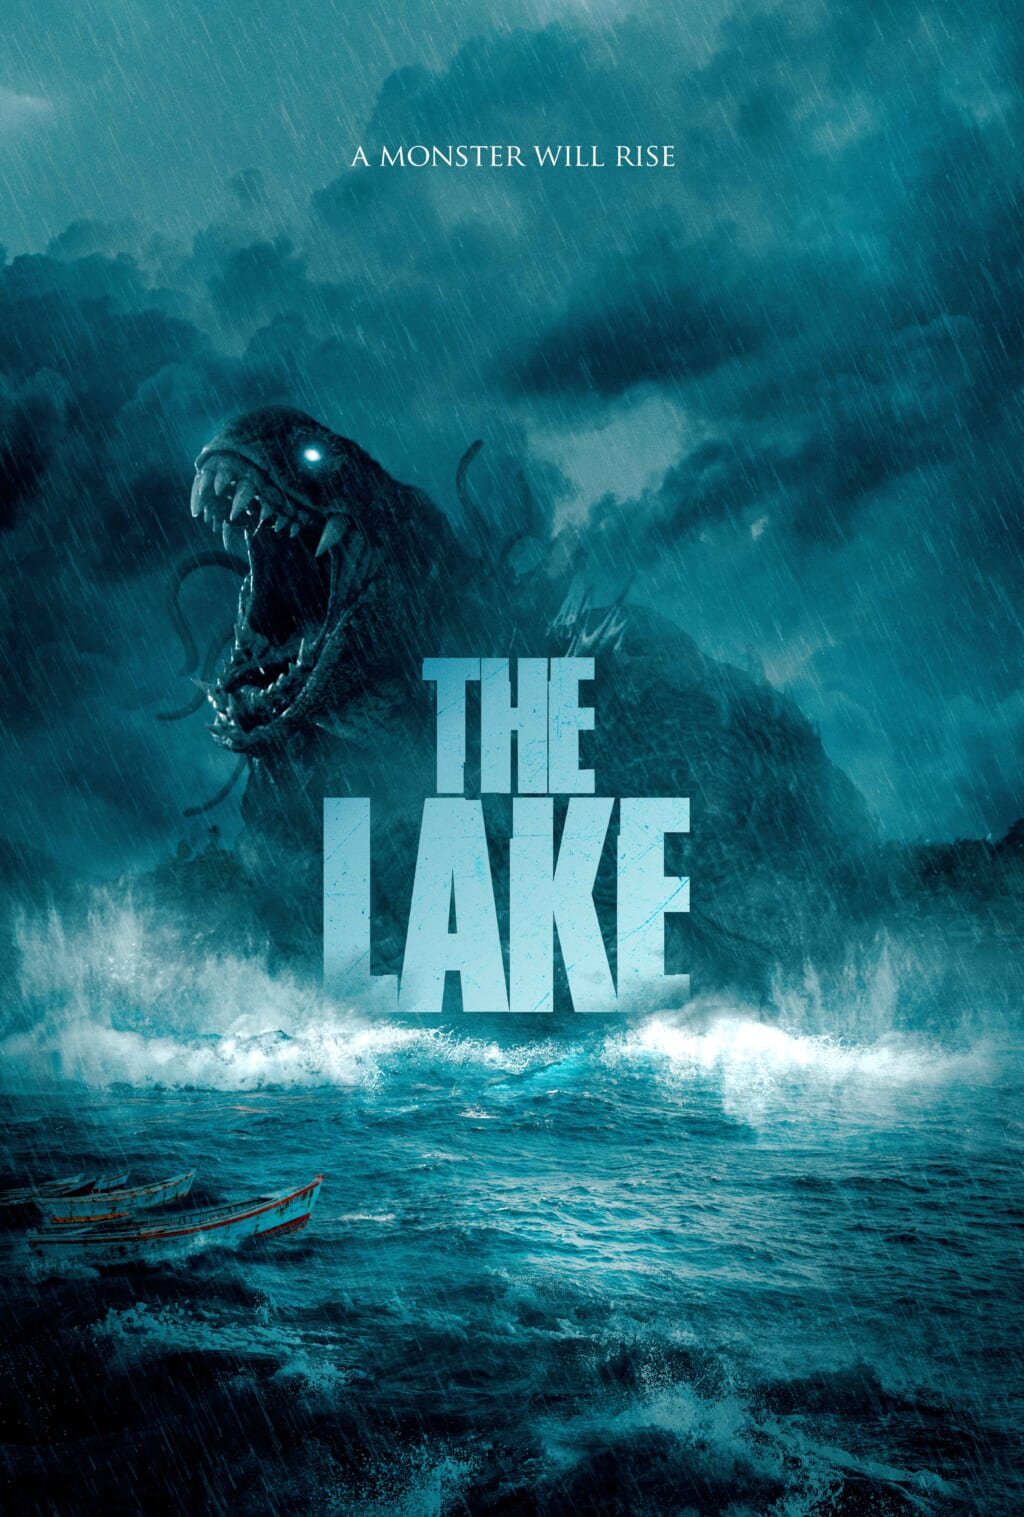 The Lake Sales Art 1024x1517 - 'The Lake' Trailer Delivers Incredible Gigantic Monster Madness [Exclusive]